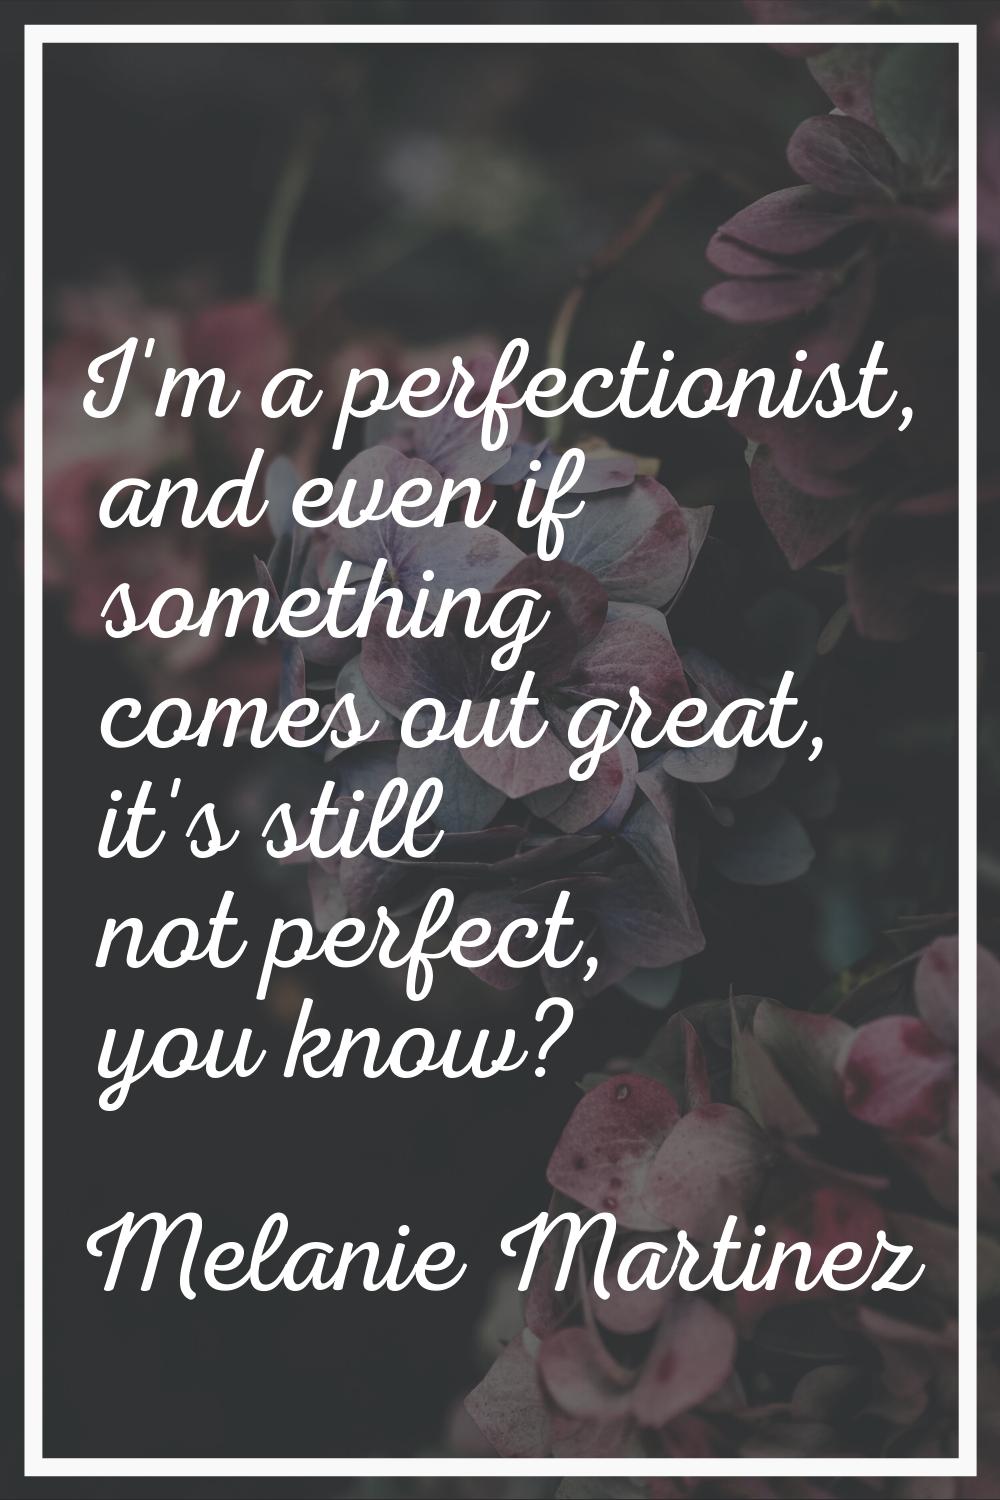 I'm a perfectionist, and even if something comes out great, it's still not perfect, you know?